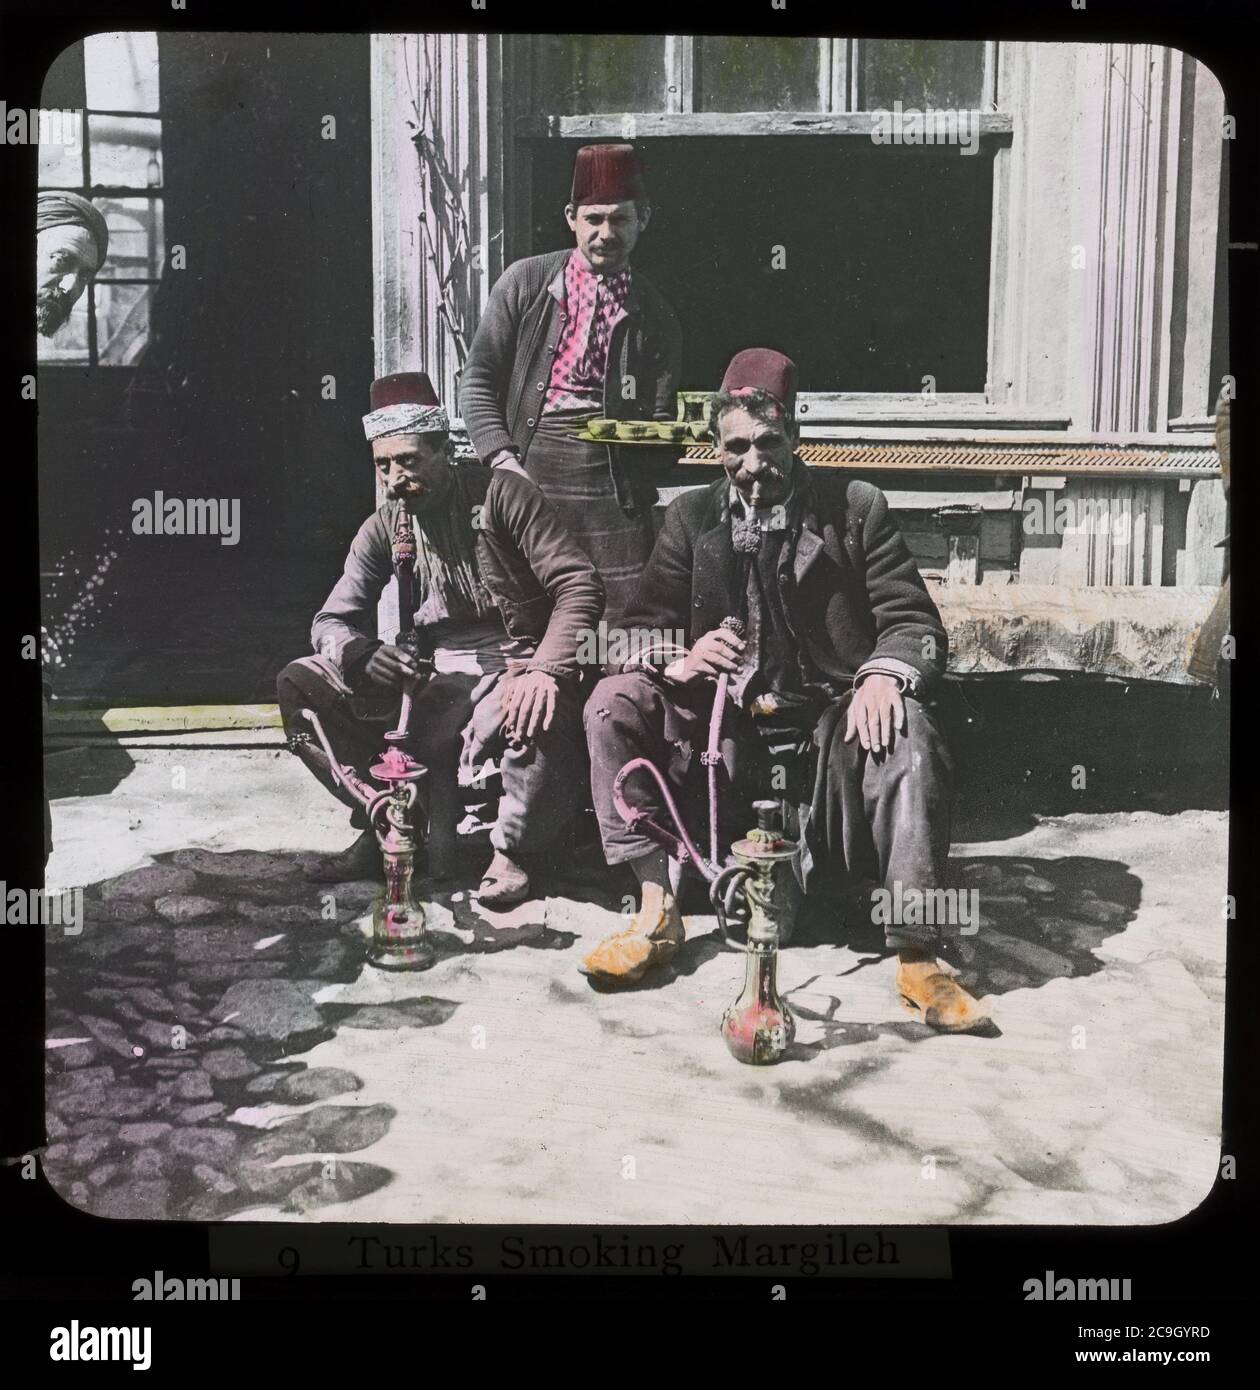 Hookah smokers in Izmir / Smyrna, Turkey. Hand-colored photograph on dry glass plate from the Herry W. Schaefer collection, around 1910. Stock Photo